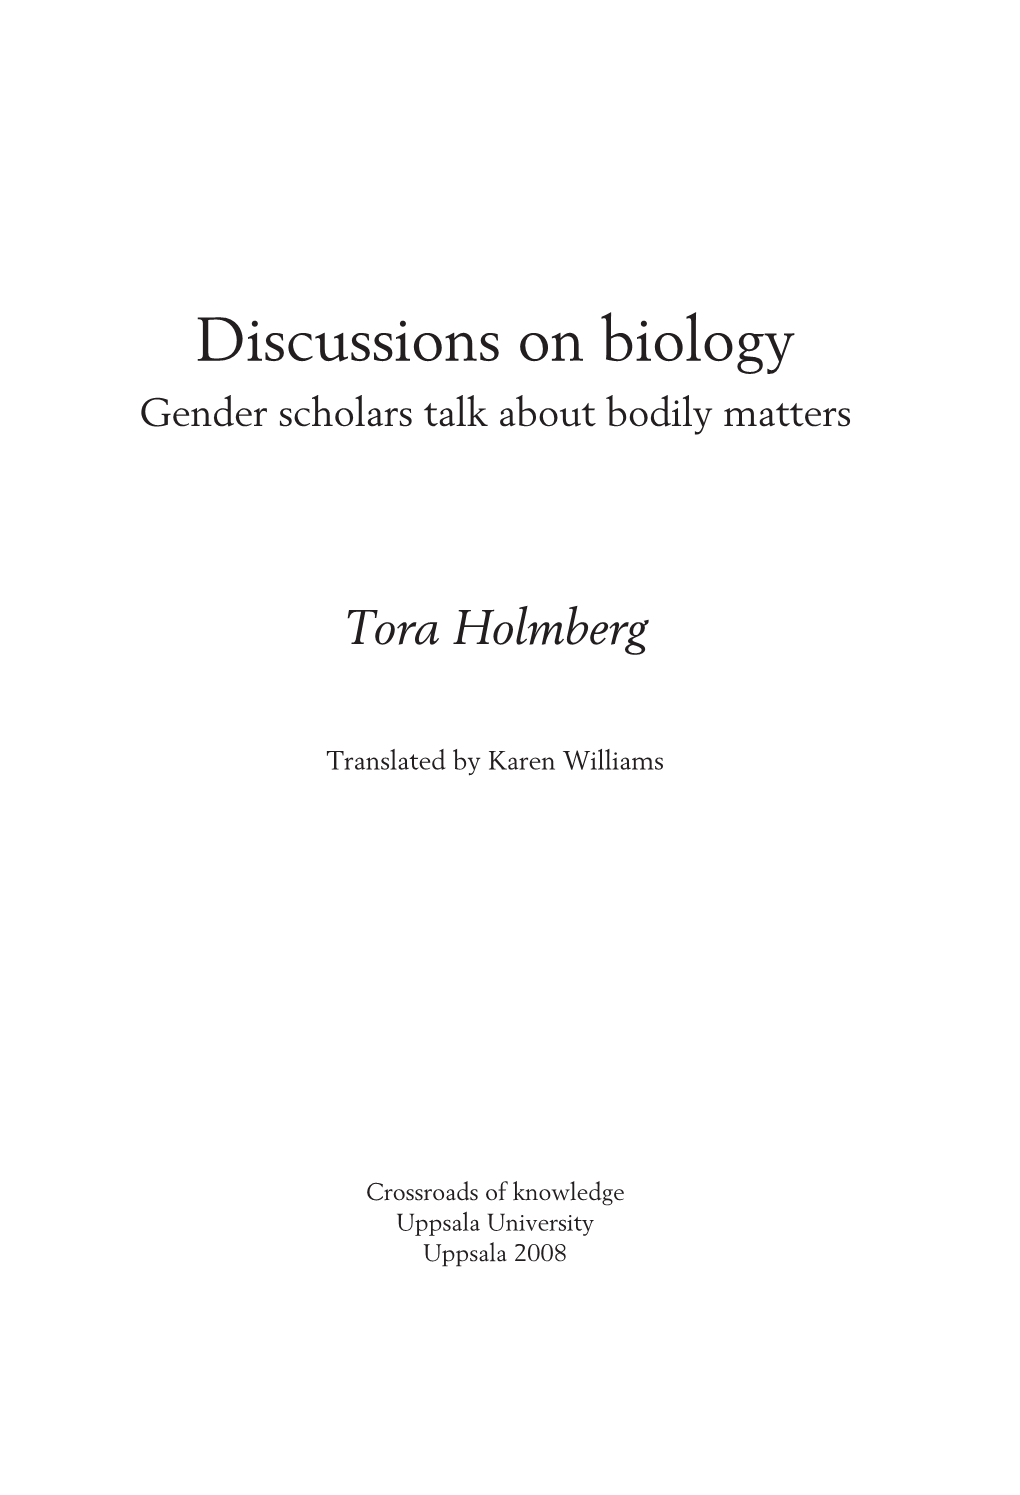 Discussions on Biology Gender Scholars Talk About Bodily Matters